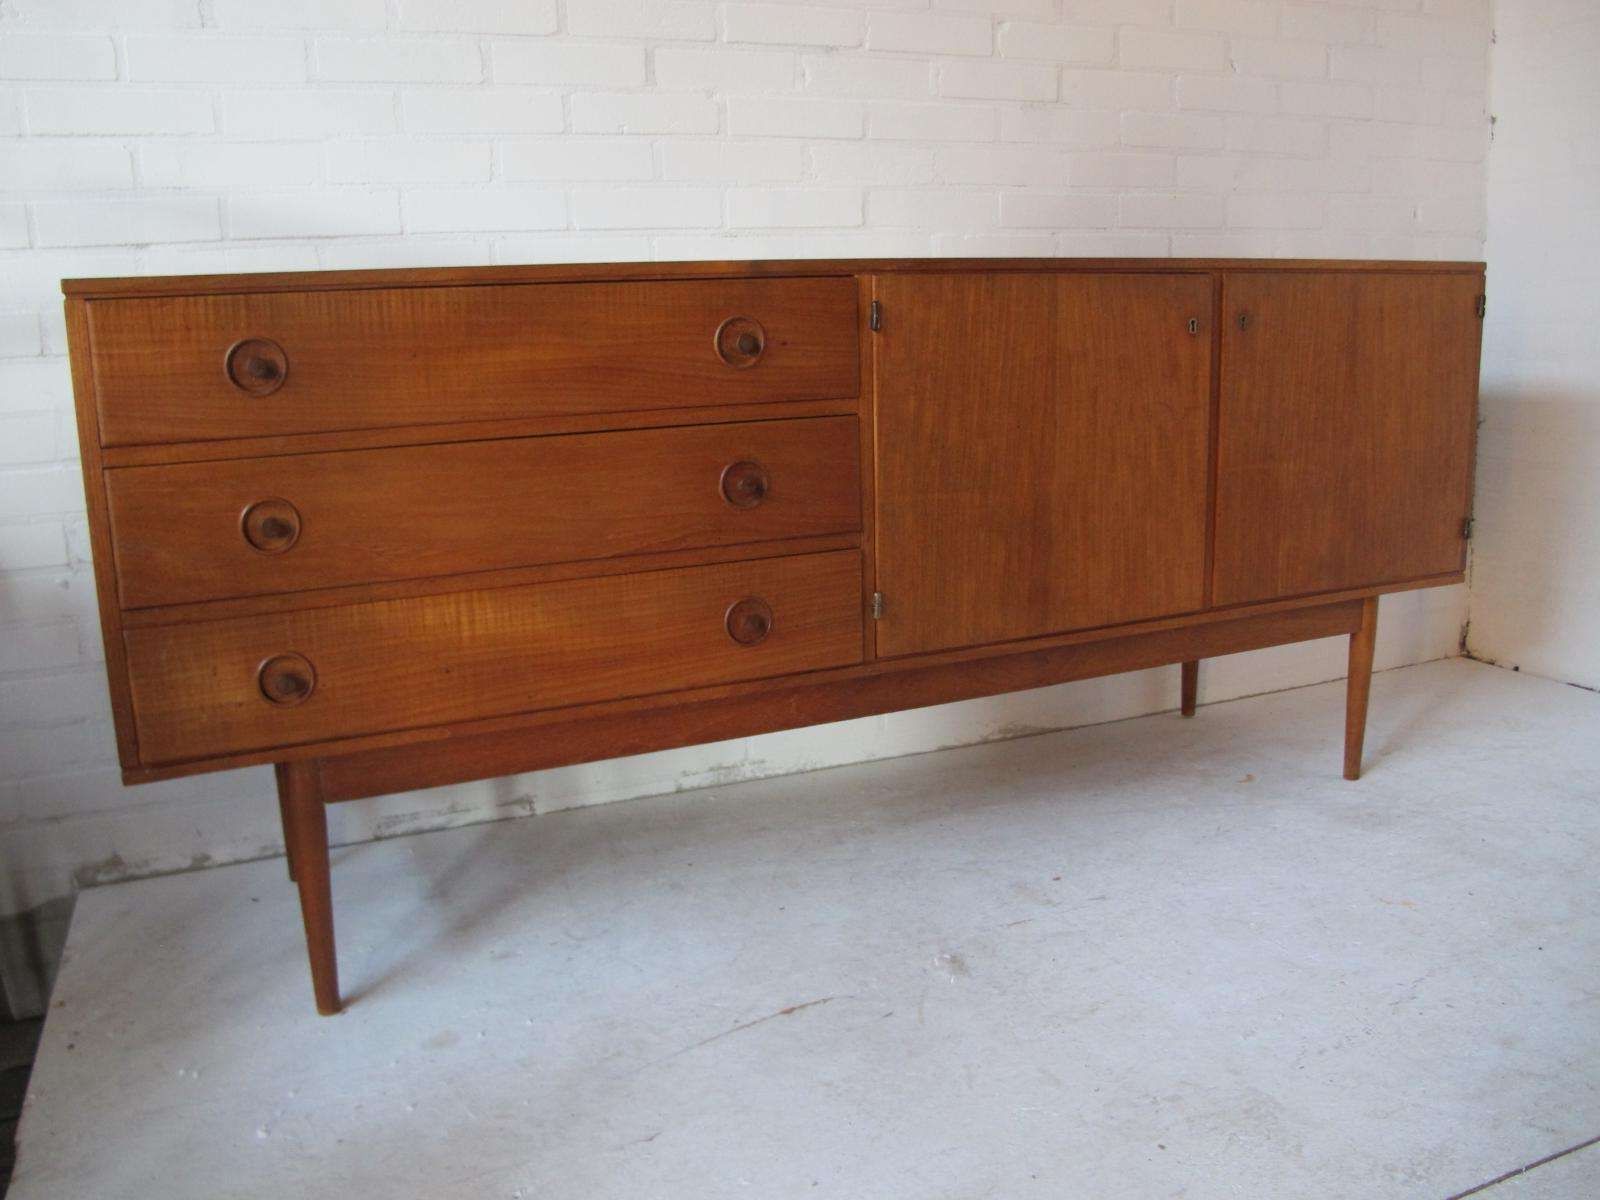 Danish Vintage Teak Sideboard With One Interior Shelf For Sale At Inside Danish Retro Sideboards (View 14 of 20)